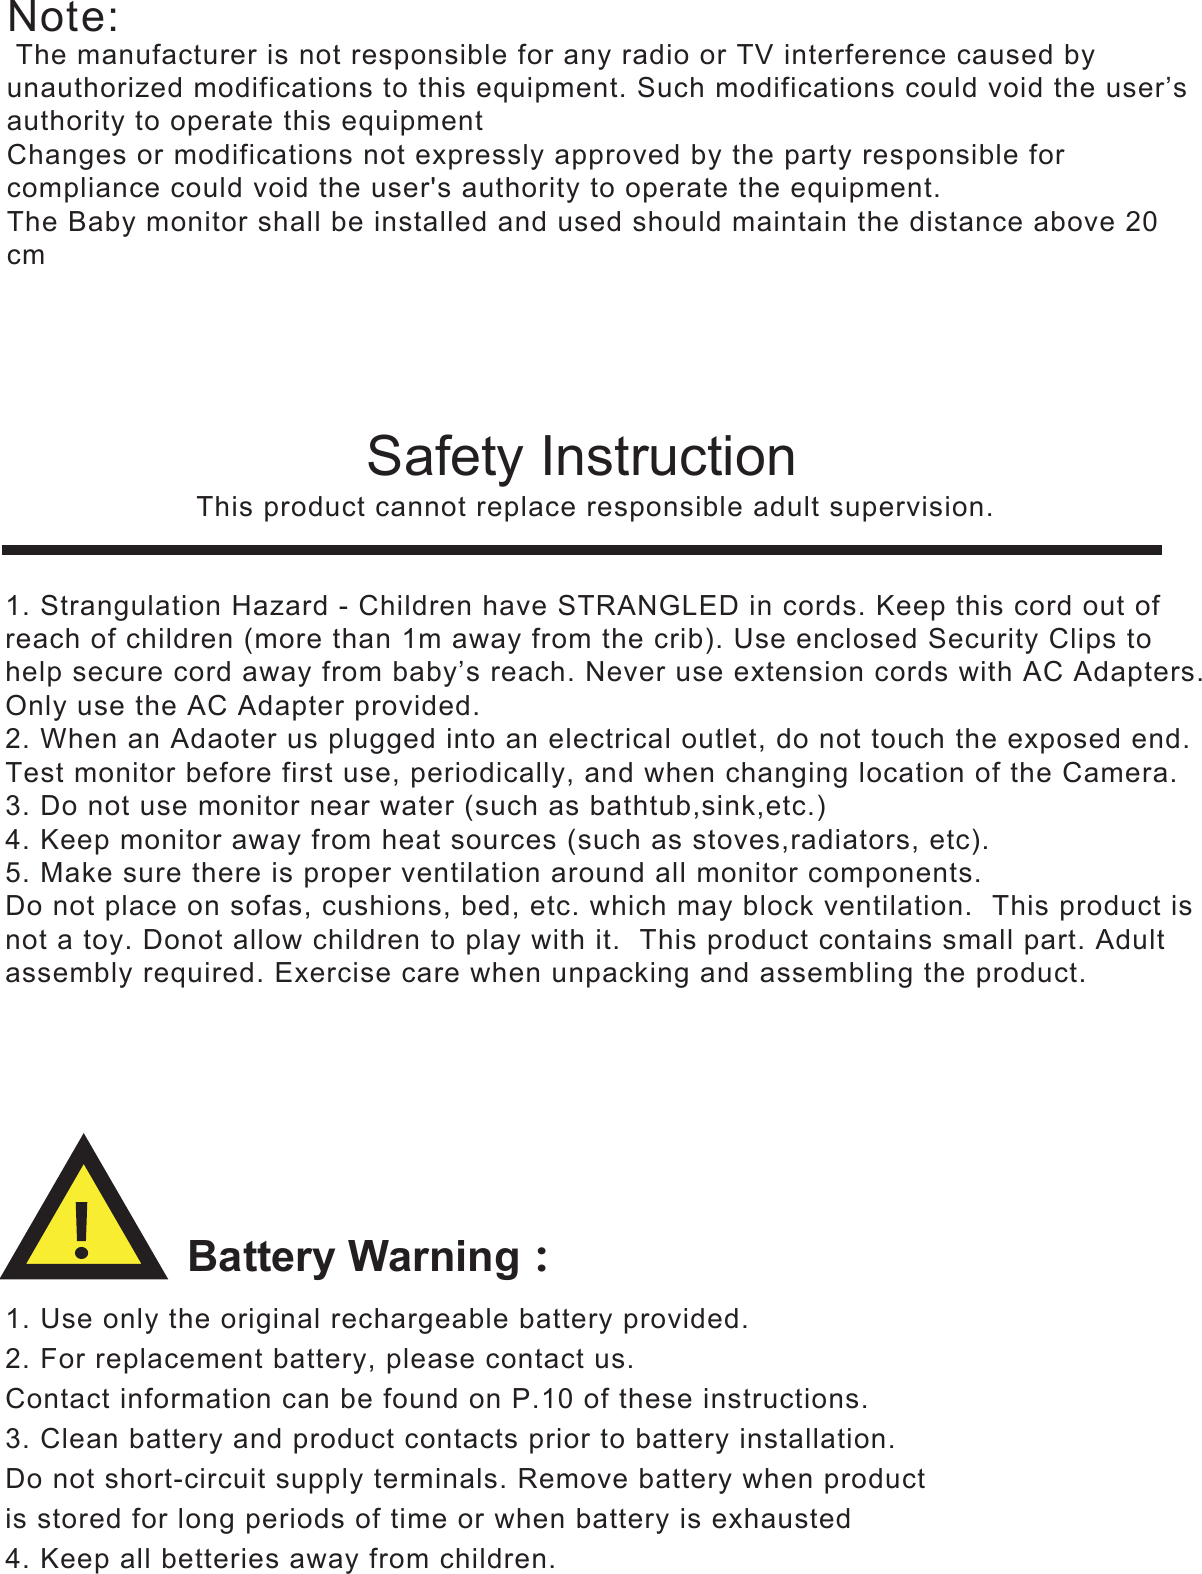 Battery Warning͵Safety Instruction   This product cannot replace responsible adult supervision.1. Use only the original rechargeable battery provided.2. For replacement battery, please contact us.Contact information can be found on P.10 of these instructions.3. Clean battery and product contacts prior to battery installation.Do not short-circuit supply terminals. Remove battery when productis stored for long periods of time or when battery is exhausted4. Keep all betteries away from children.1. Strangulation Hazard - Children have STRANGLED in cords. Keep this cord out ofreach of children (more than 1m away from the crib). Use enclosed Security Clips tohelp secure cord away from baby’s reach. Never use extension cords with AC Adapters.Only use the AC Adapter provided.2. When an Adaoter us plugged into an electrical outlet, do not touch the exposed end.Test monitor before first use, periodically, and when changing location of the Camera.3. Do not use monitor near water (such as bathtub,sink,etc.)4. Keep monitor away from heat sources (such as stoves,radiators, etc).5. Make sure there is proper ventilation around all monitor components.Do not place on sofas, cushions, bed, etc. which may block ventilation.  This product isnot a toy. Donot allow children to play with it.  This product contains small part. Adultassembly required. Exercise care when unpacking and assembling the product.Note: The manufacturer is not responsible for any radio or TV interference caused by unauthorized modifications to this equipment. Such modifications could void the user’s authority to operate this equipmentChanges or modifications not expressly approved by the party responsible for compliance could void the user&apos;s authority to operate the equipment.The Baby monitor shall be installed and used should maintain the distance above 20 cm